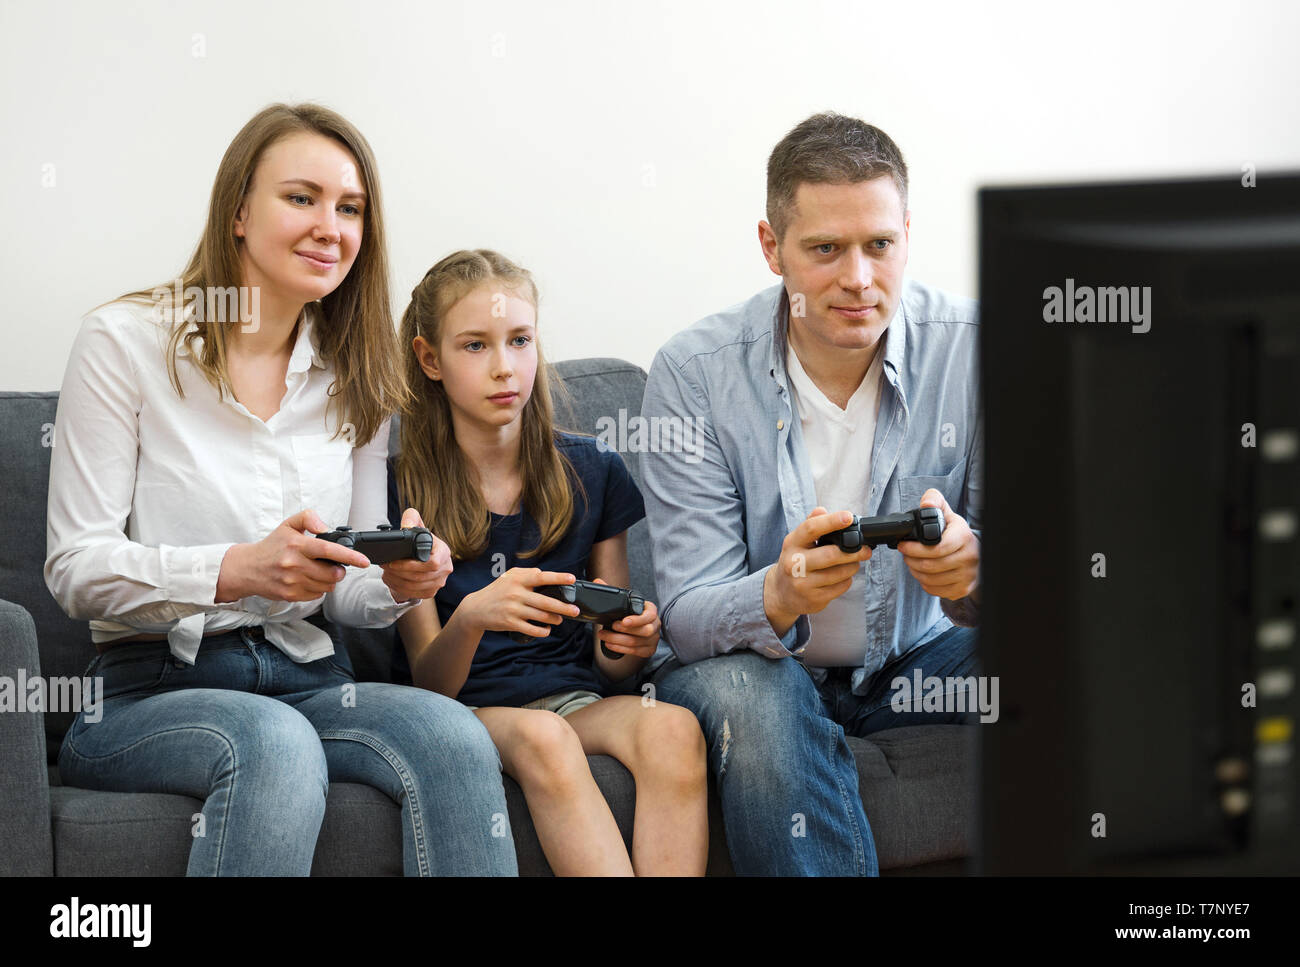 Mom, Dad and their daughter playing video game at home Stock Photo pic